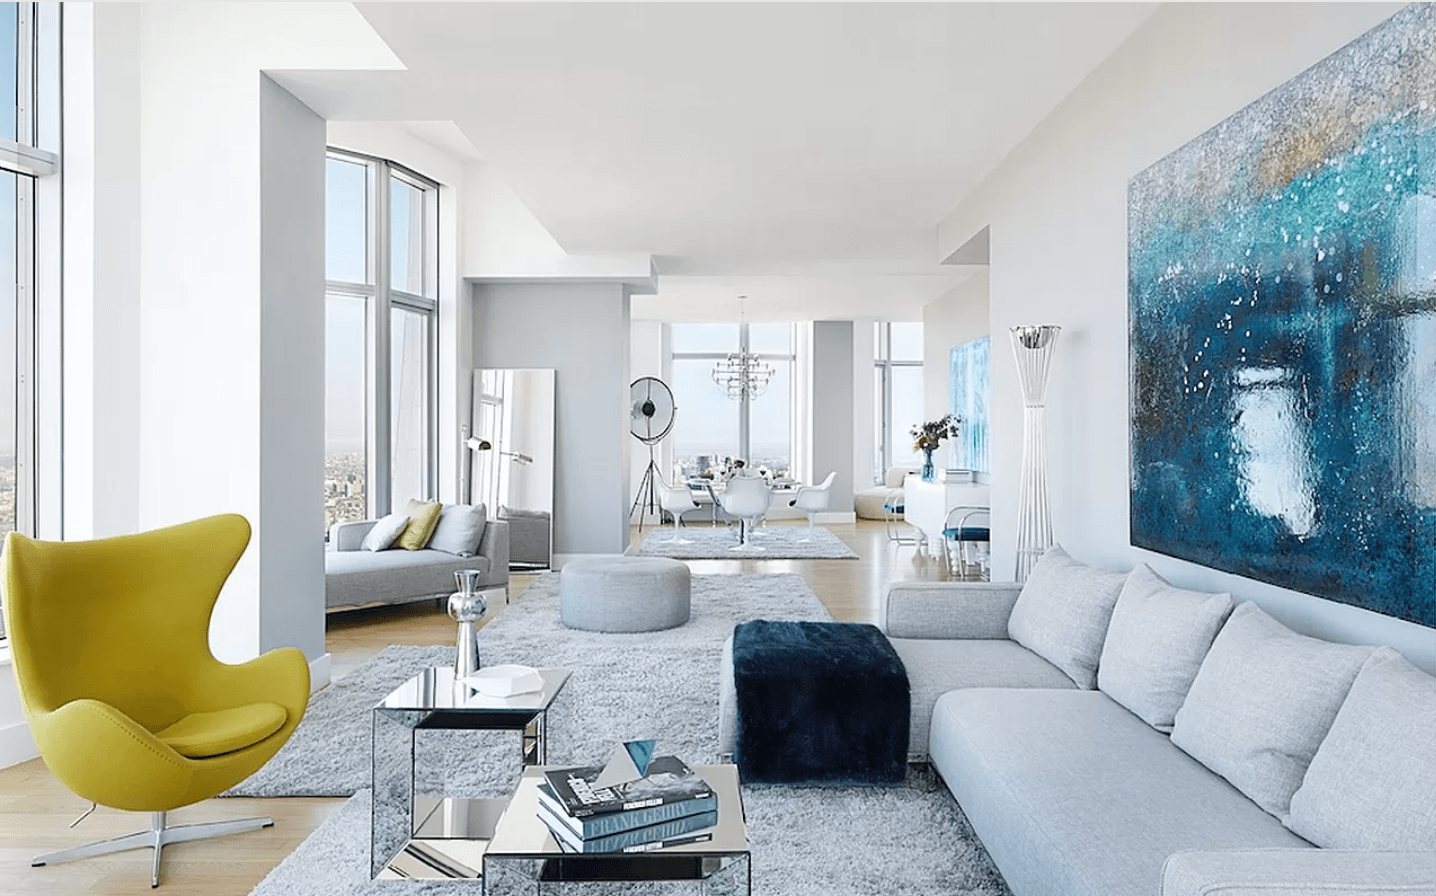 STYLISH 3BR/2.5BA APARTMENT IN ULTRA LUXURY SEAPORT DISTRICT BUILDING, WITH BREATHTAKING CITY VIEWS